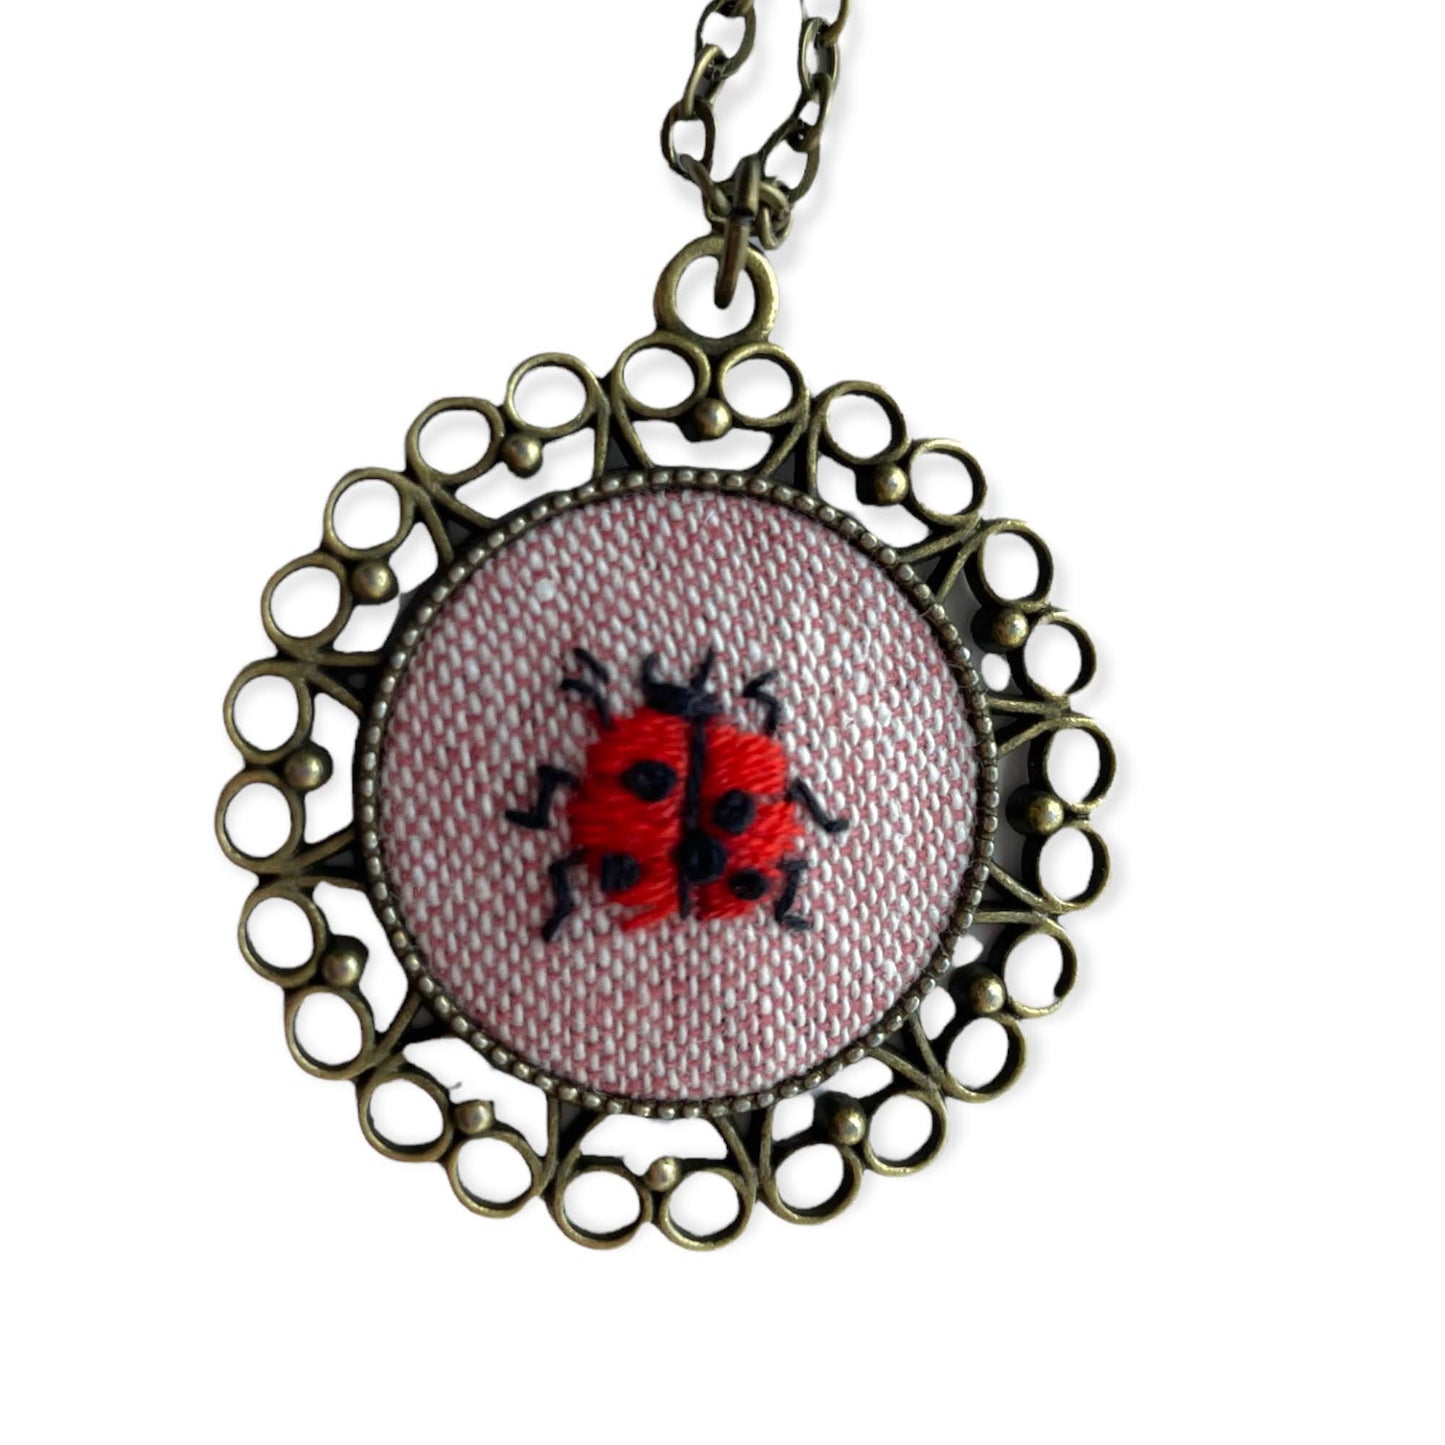 Hand embroidered lady bug necklace